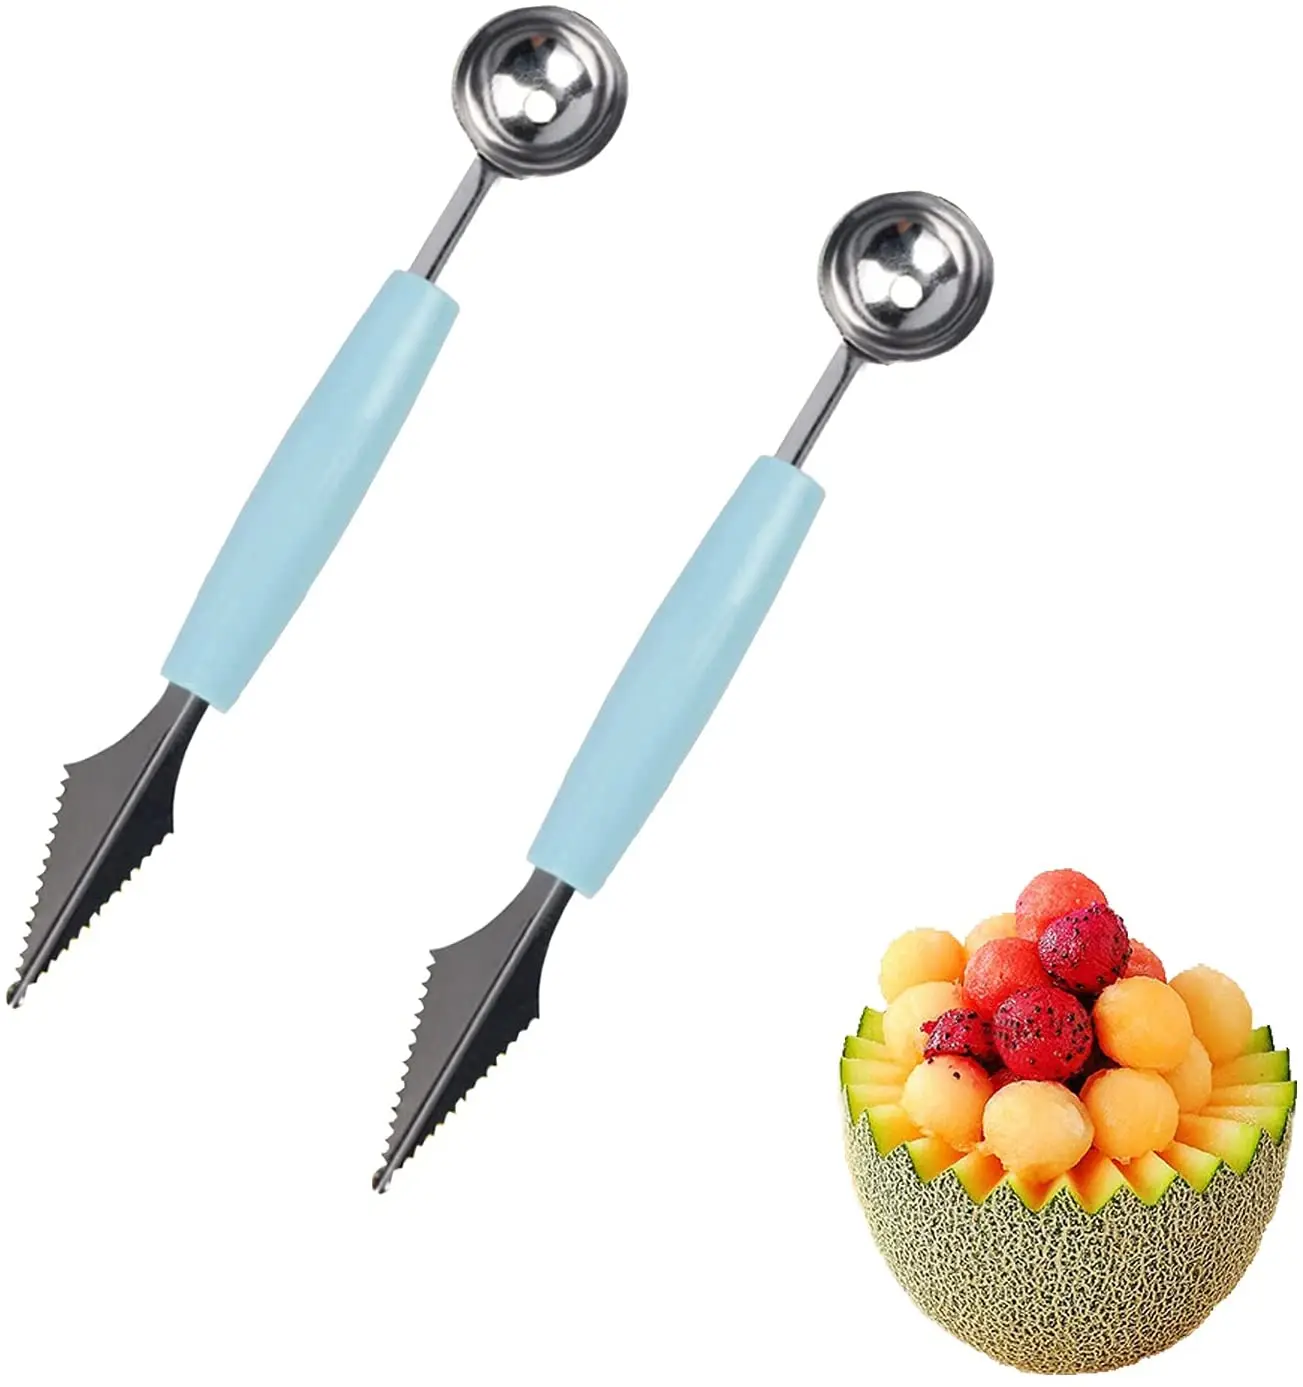 

1 pcs Melon Baller Scoop,Stainless Steel Fruit Decoration Carving Knife,Watermelon Cantaloupe Ice Cream Dessert Kitchen Tools